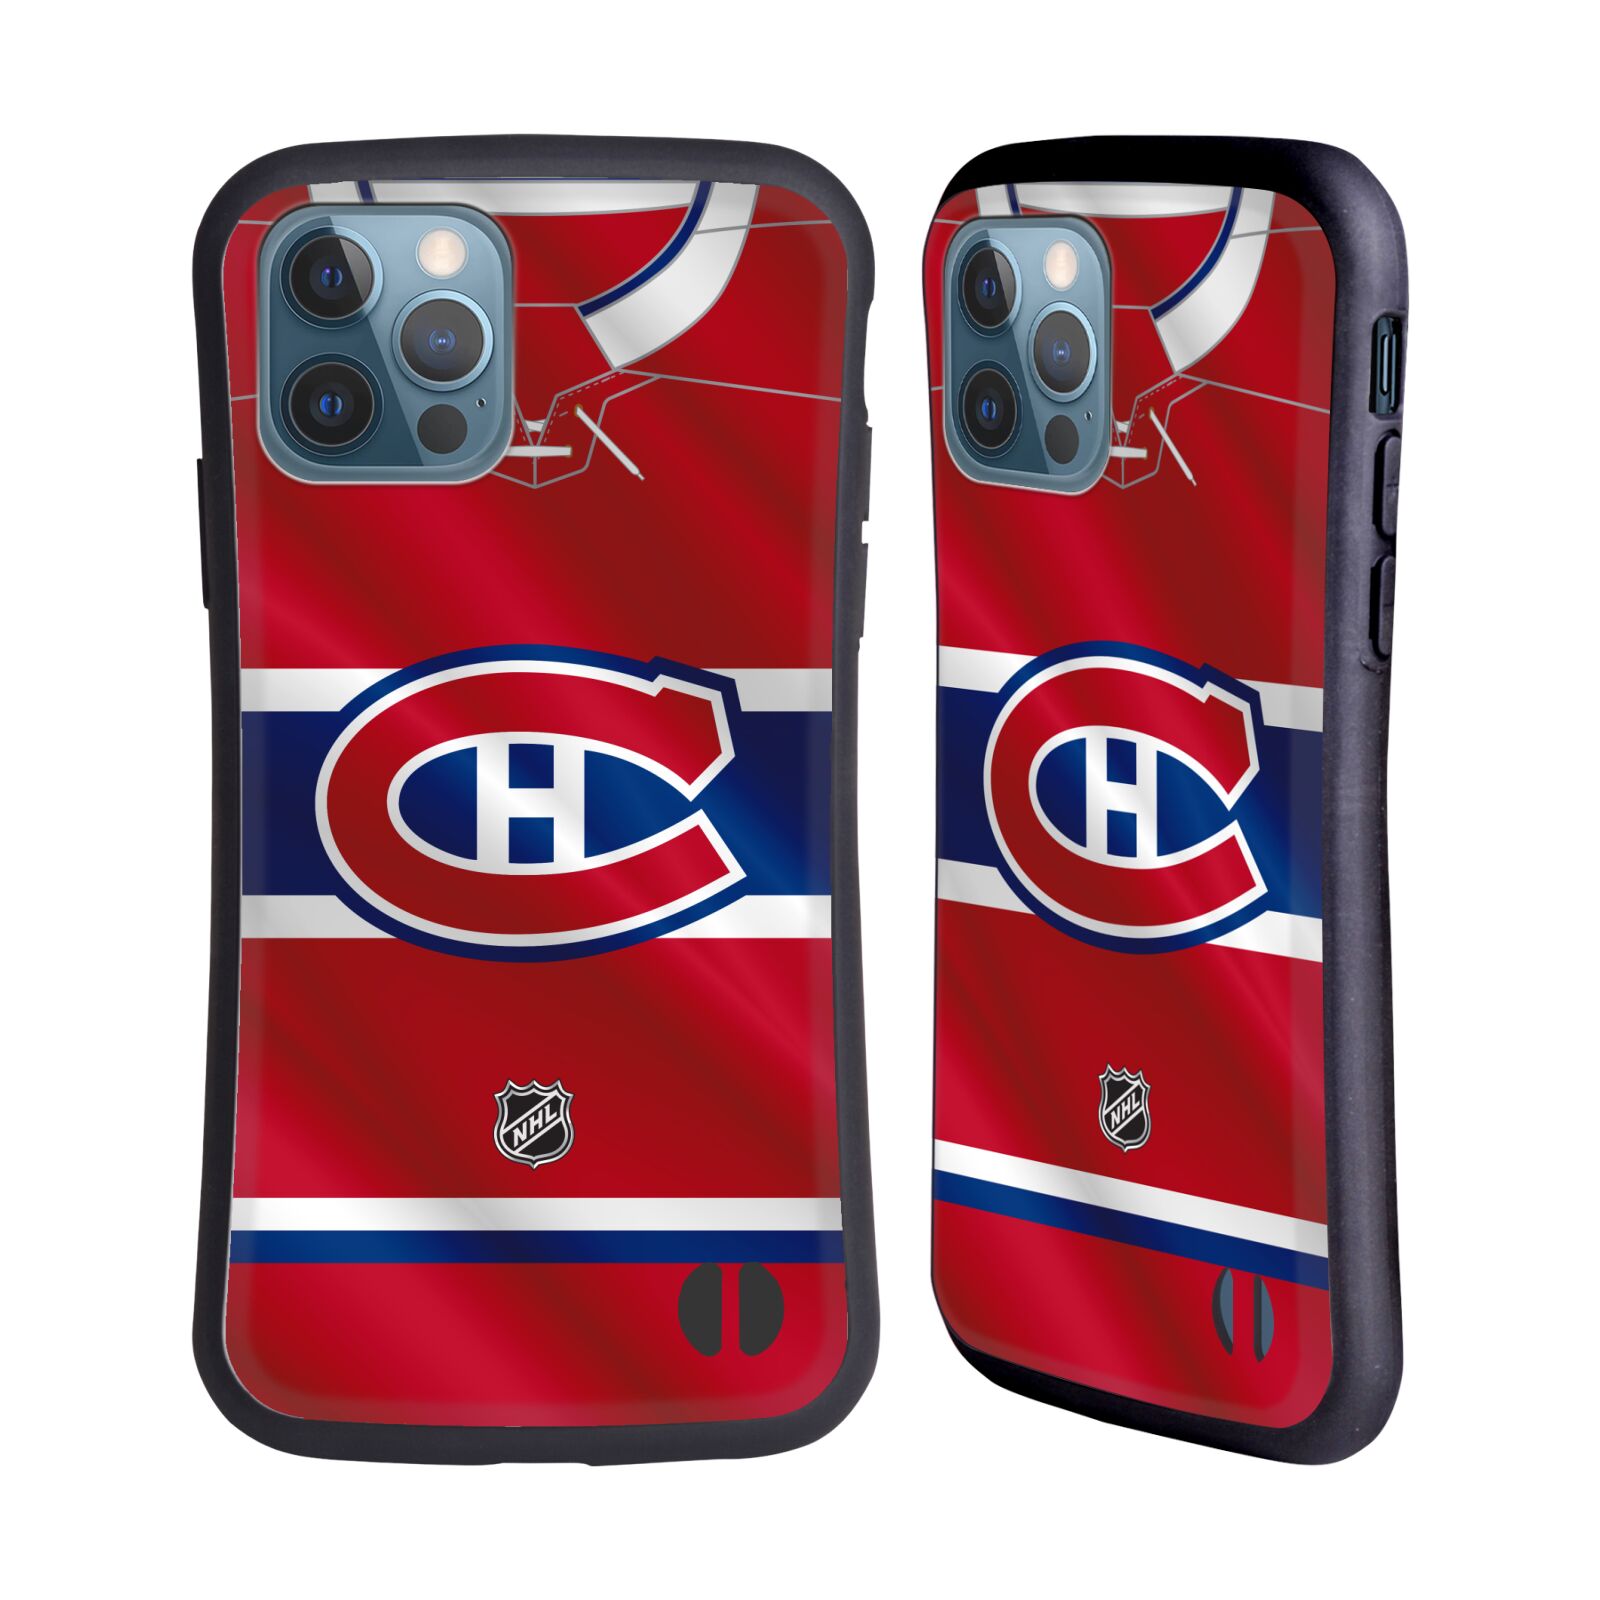 Obal na mobil Apple iPhone 12 / 12 PRO - HEAD CASE - NHL - Montreal Canadiens - znak dres